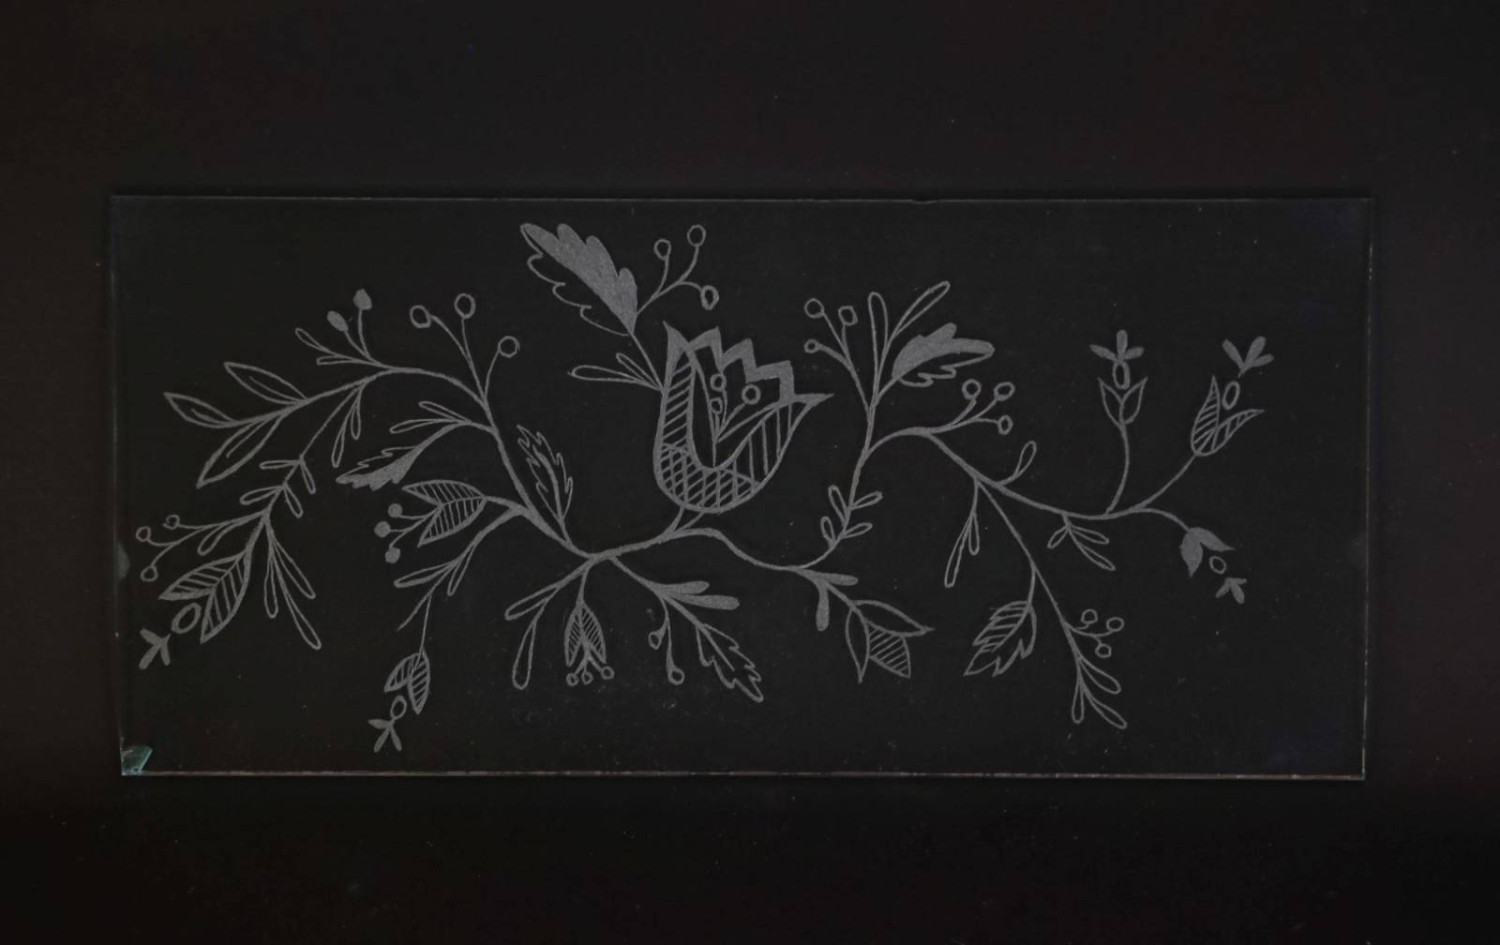 Engraved glass with traditional botanical pattern